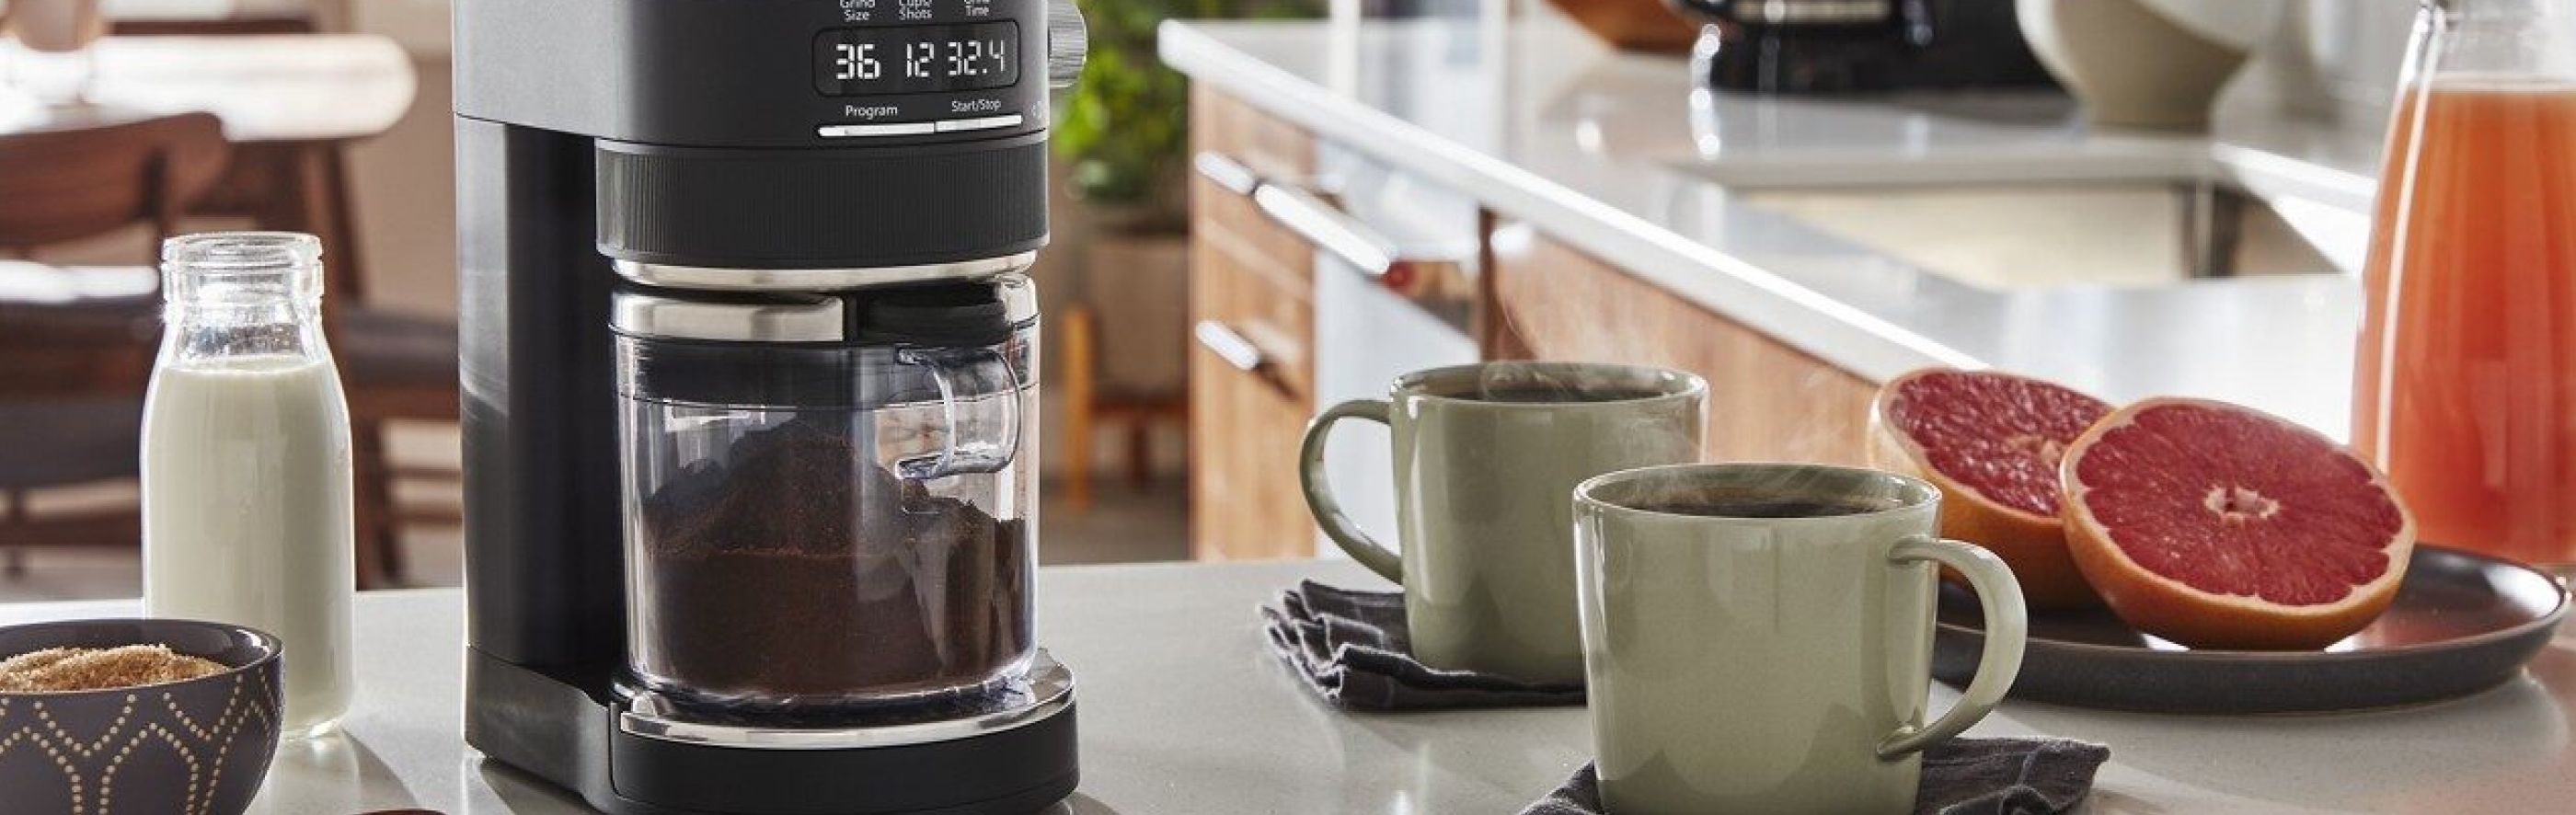 KitchenAid® Burr Coffee Grinder with coffee cups and grapefruit halves.